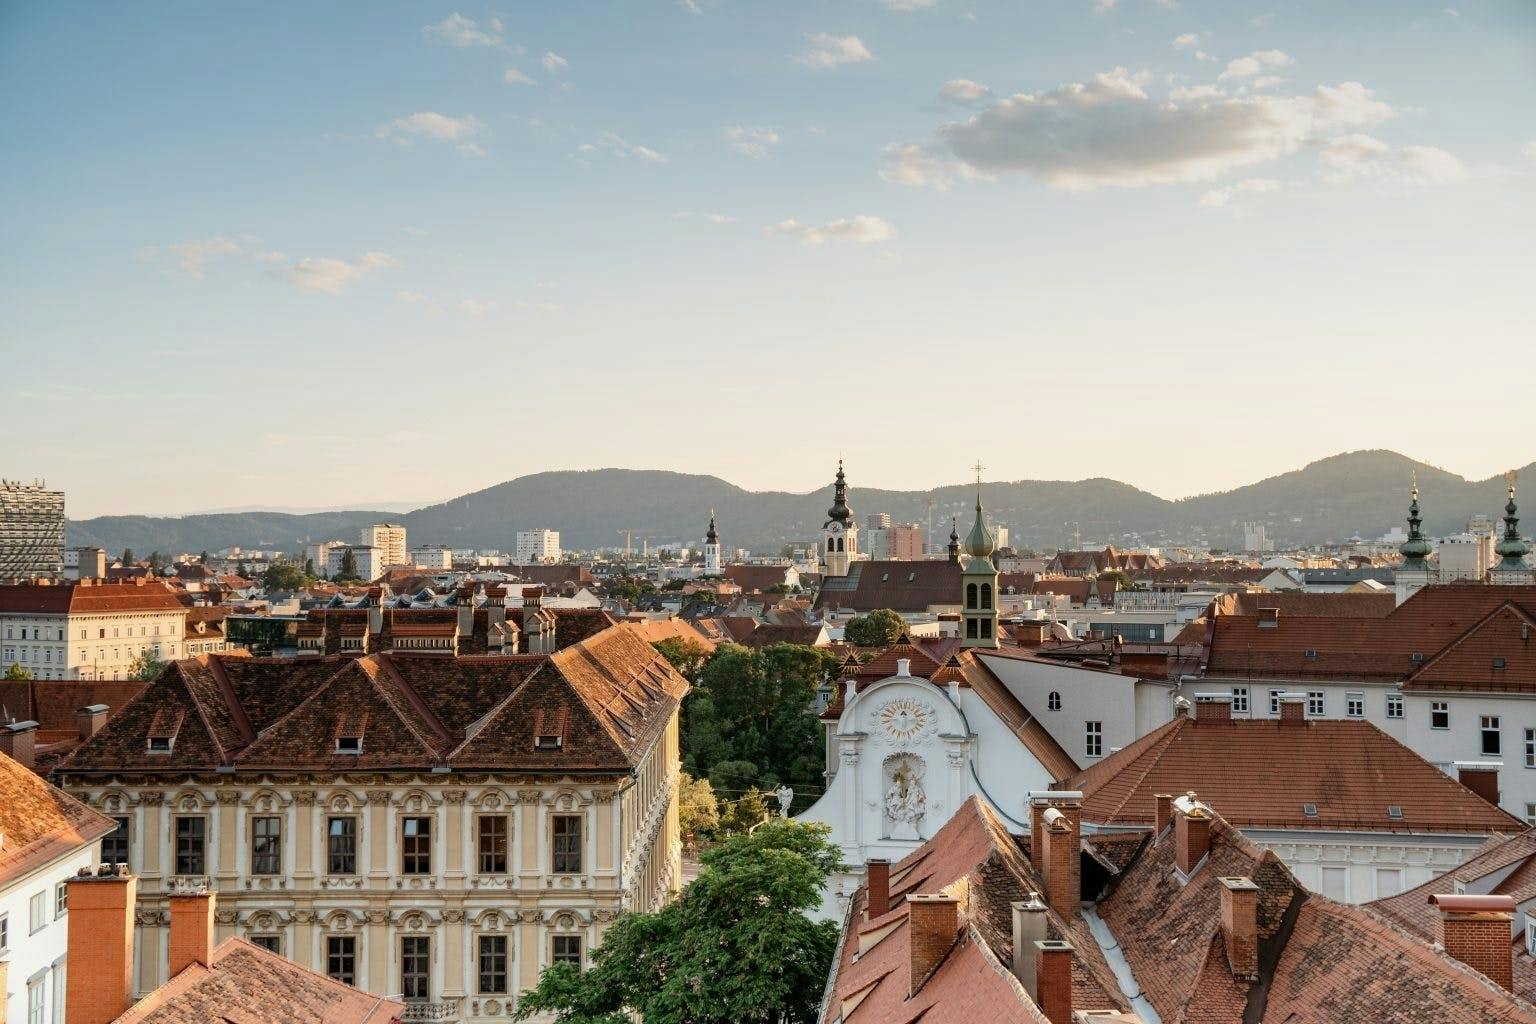 Love stories of Graz guided tour